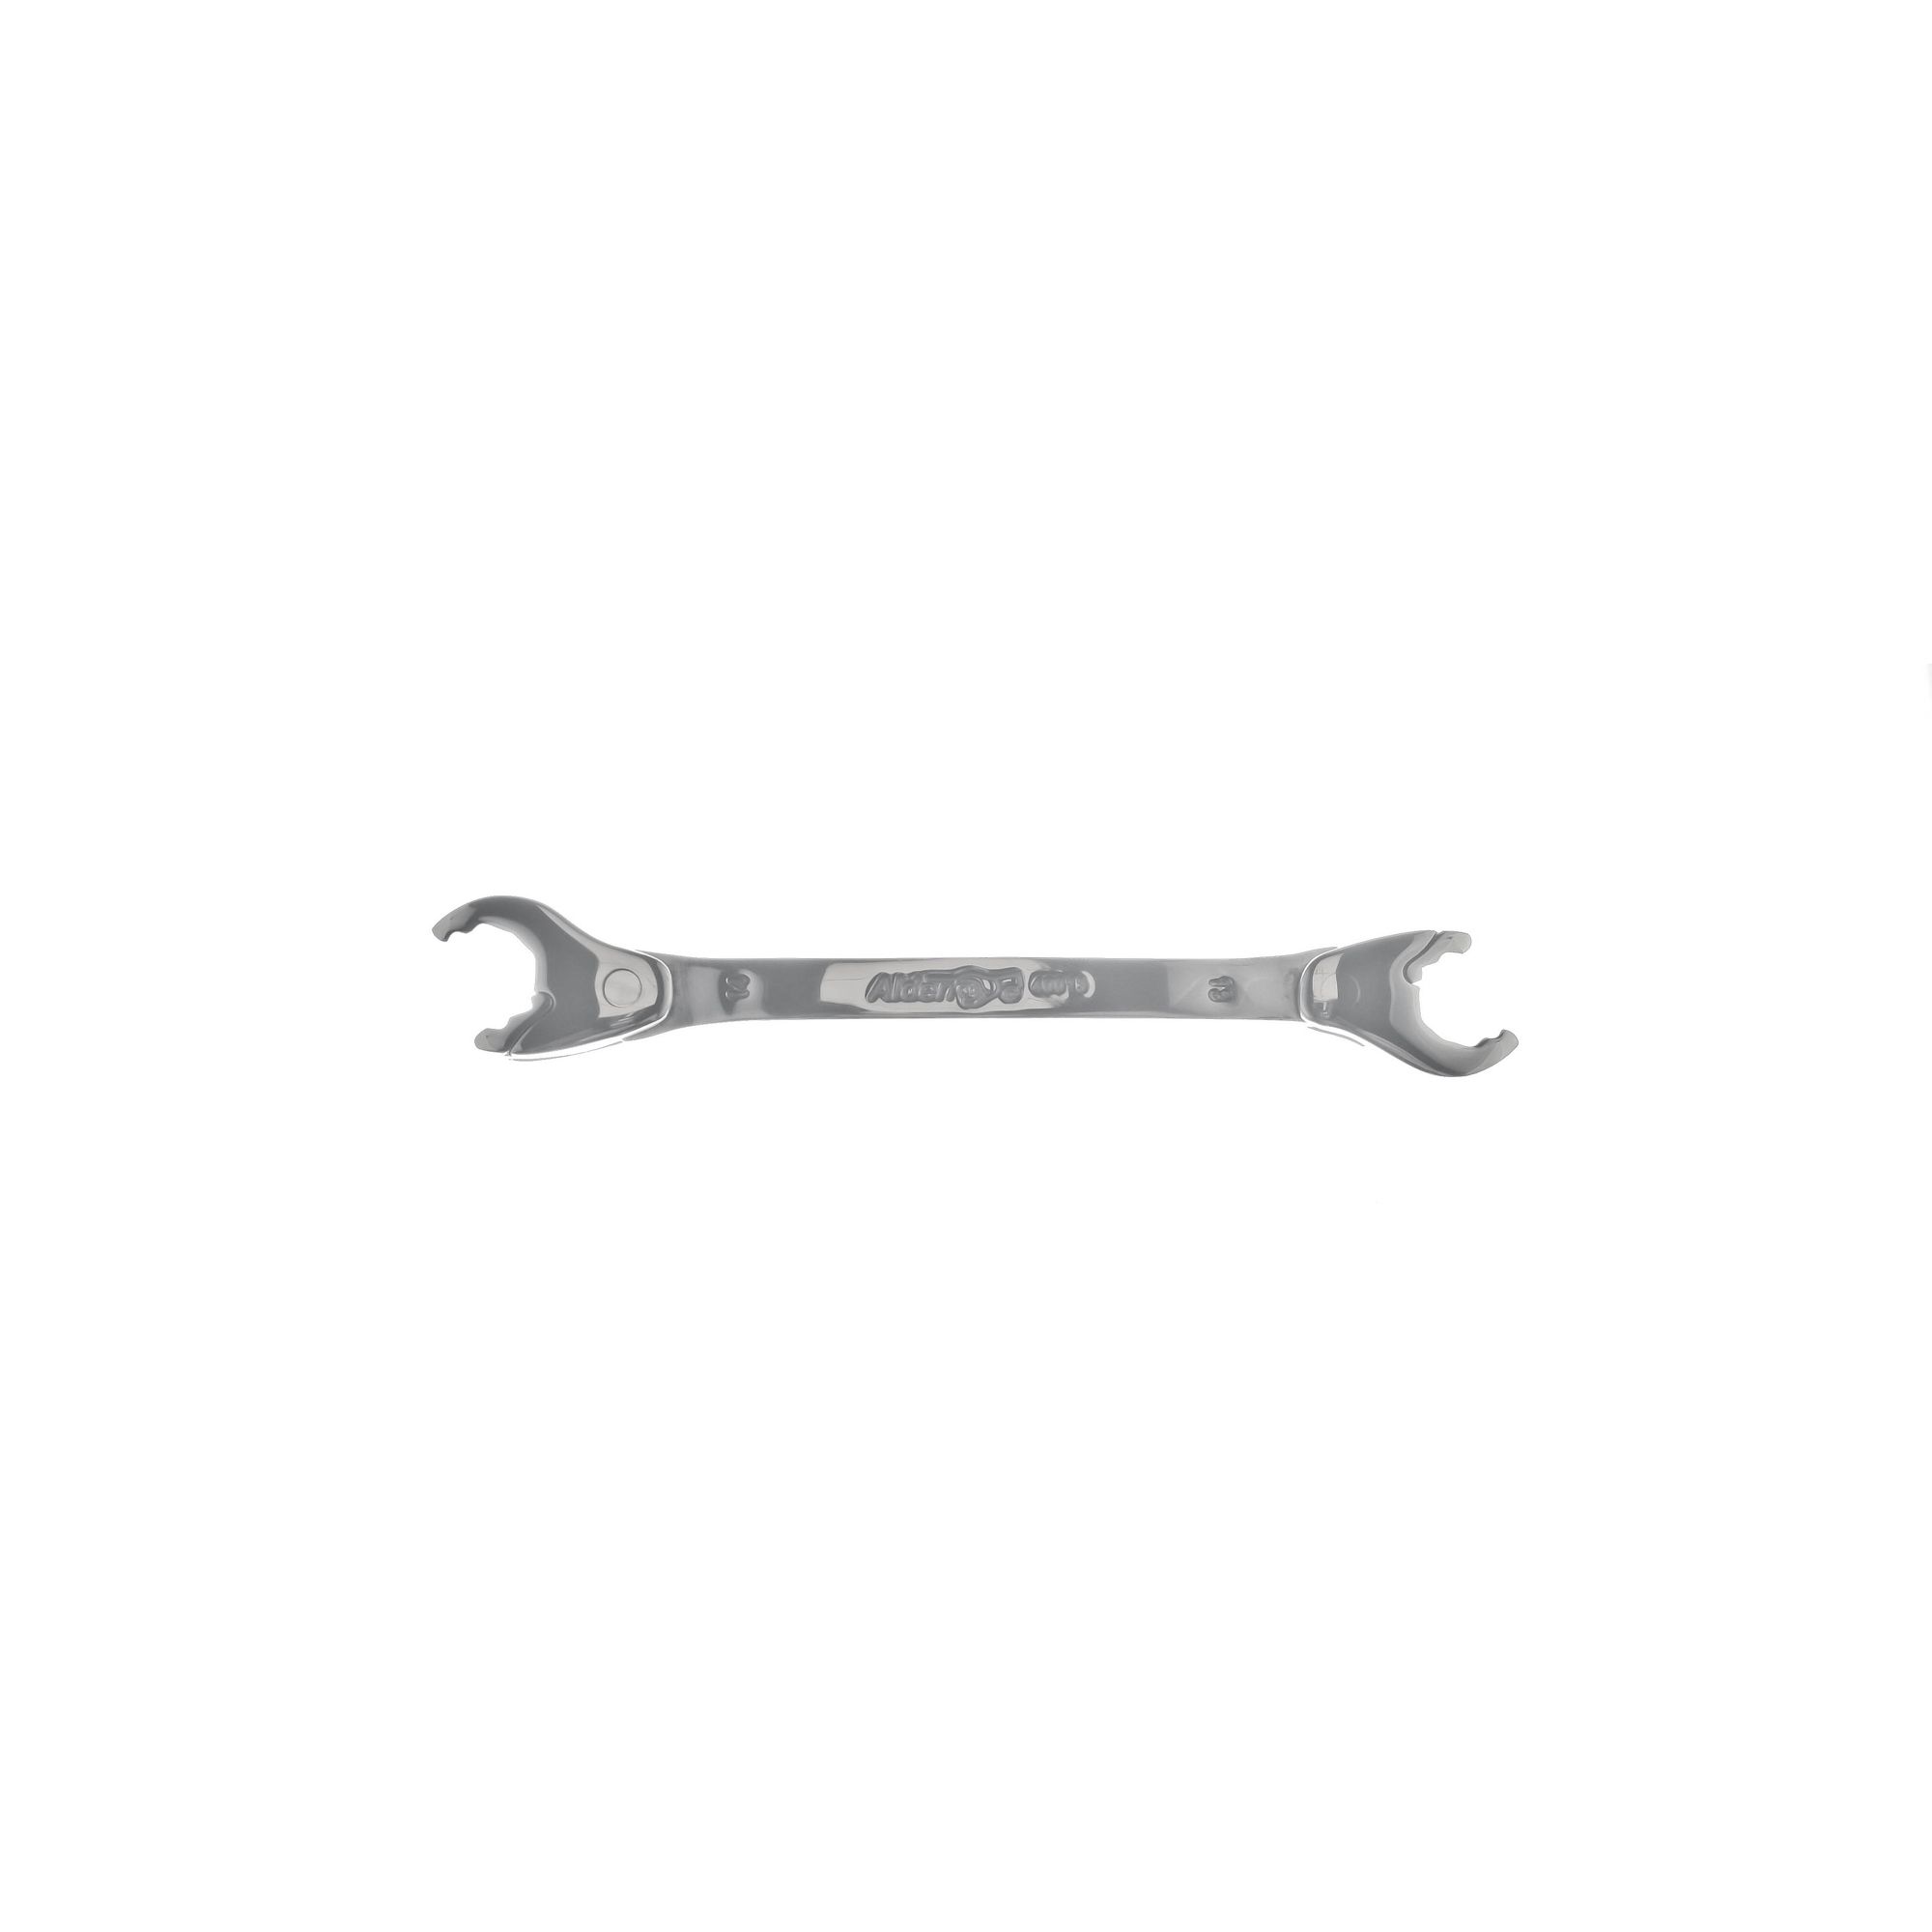 Chicago Brand 13 - 14mm Open-End Ratchet Combination Wrench